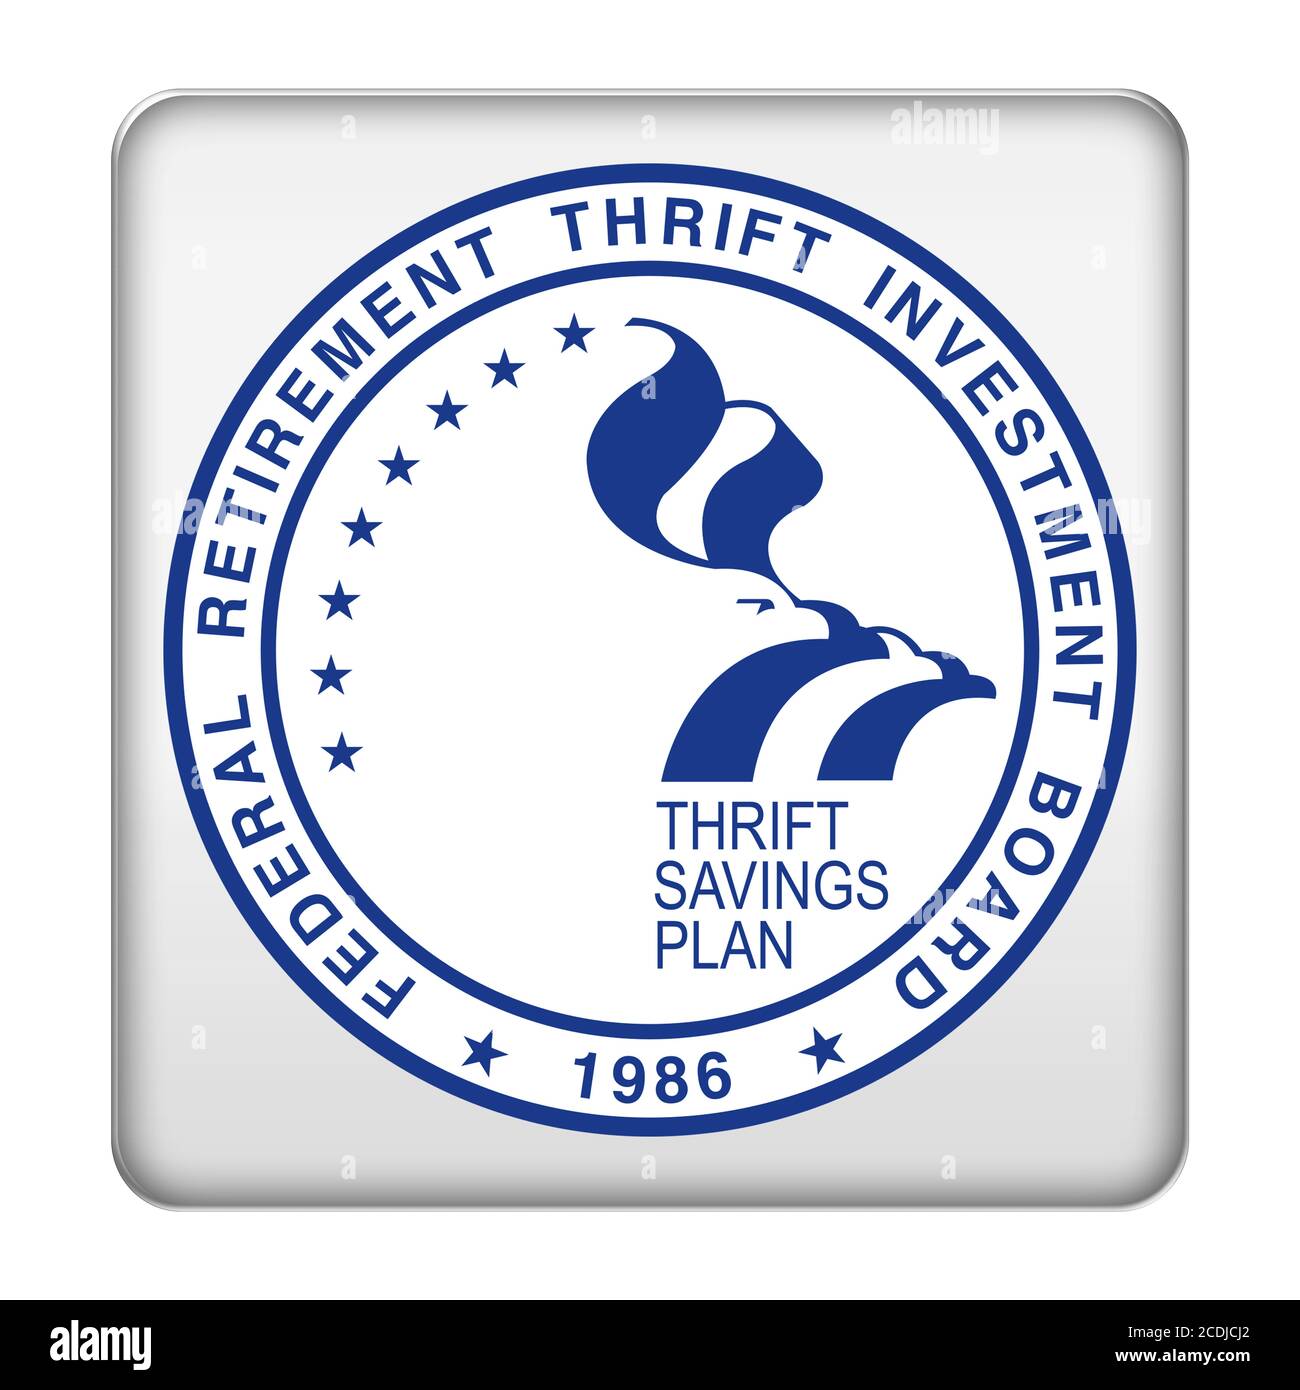 Federal Retirement Thrift Investment Board Stockfoto